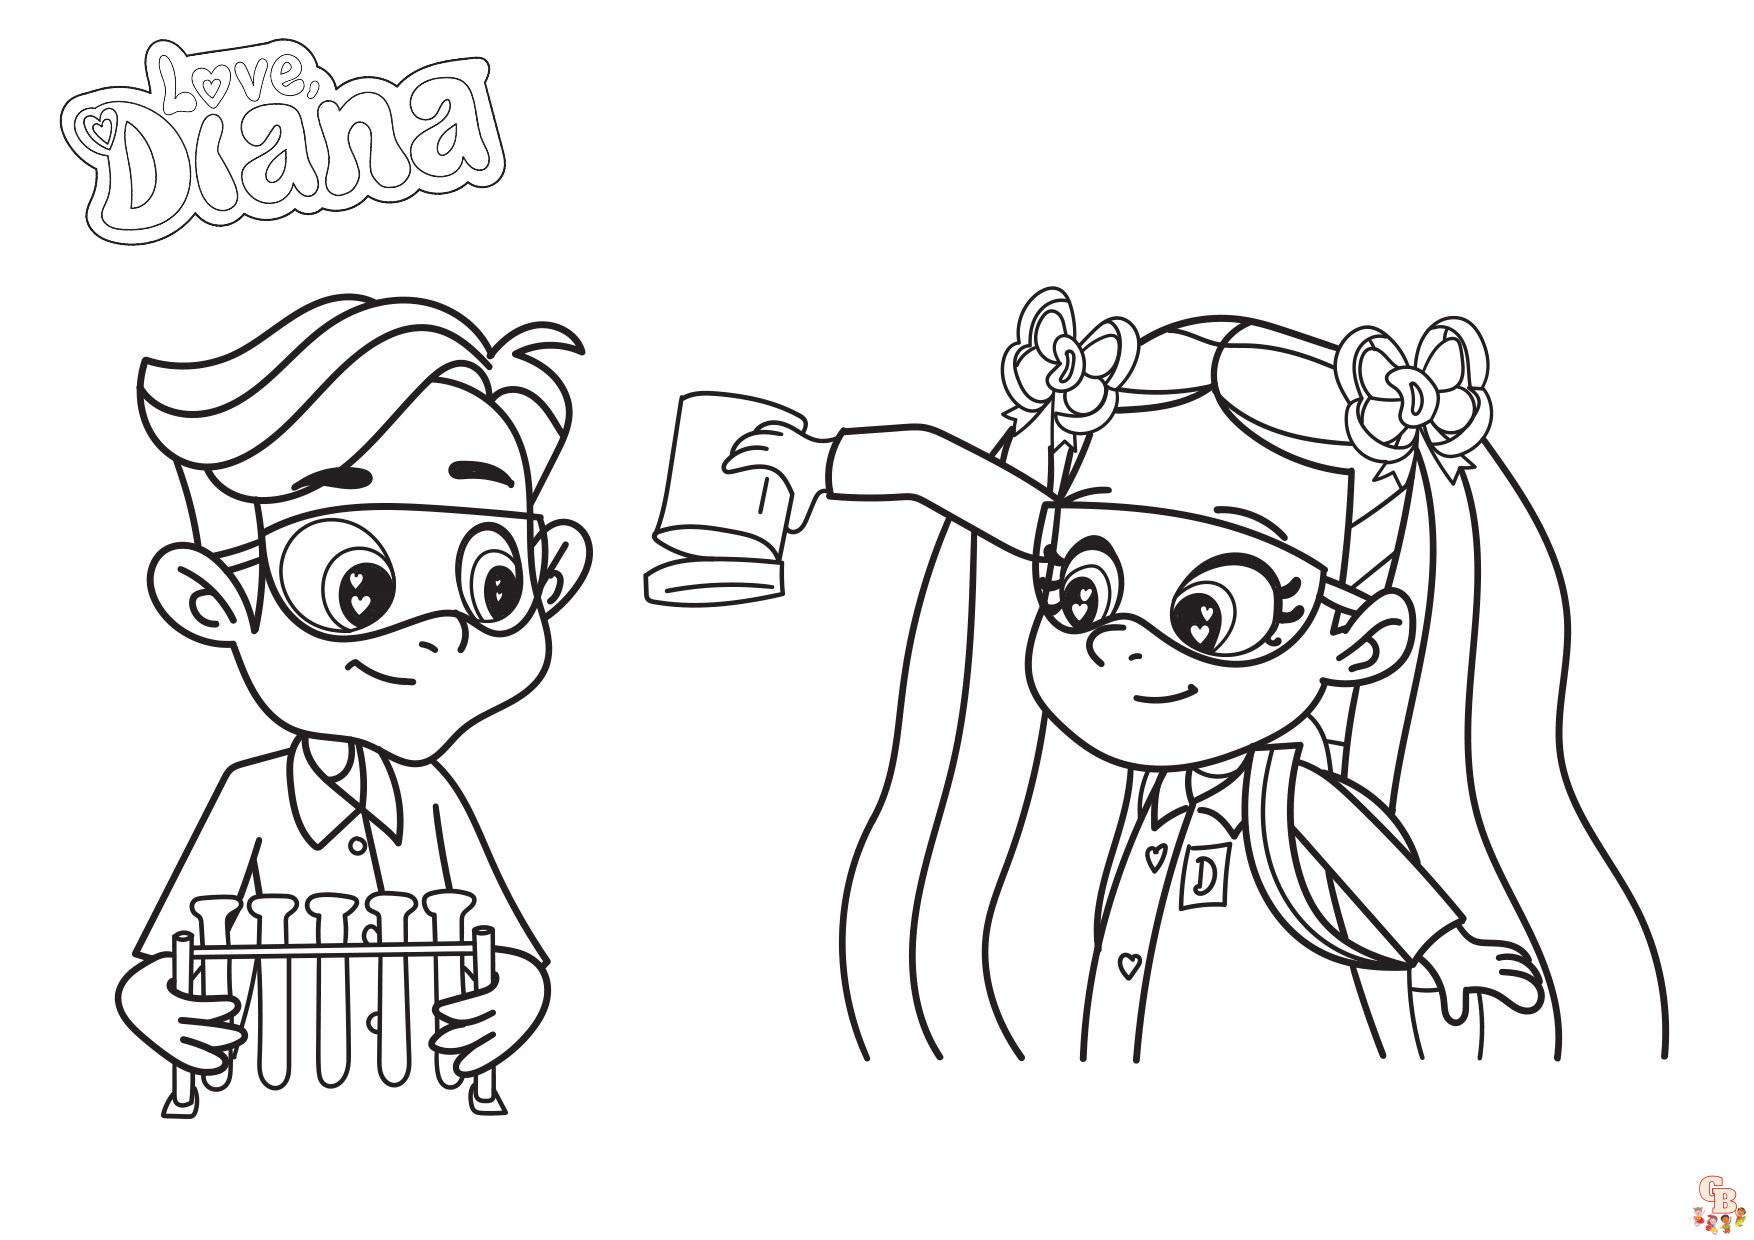 Diana and Roma Coloring Pages 6